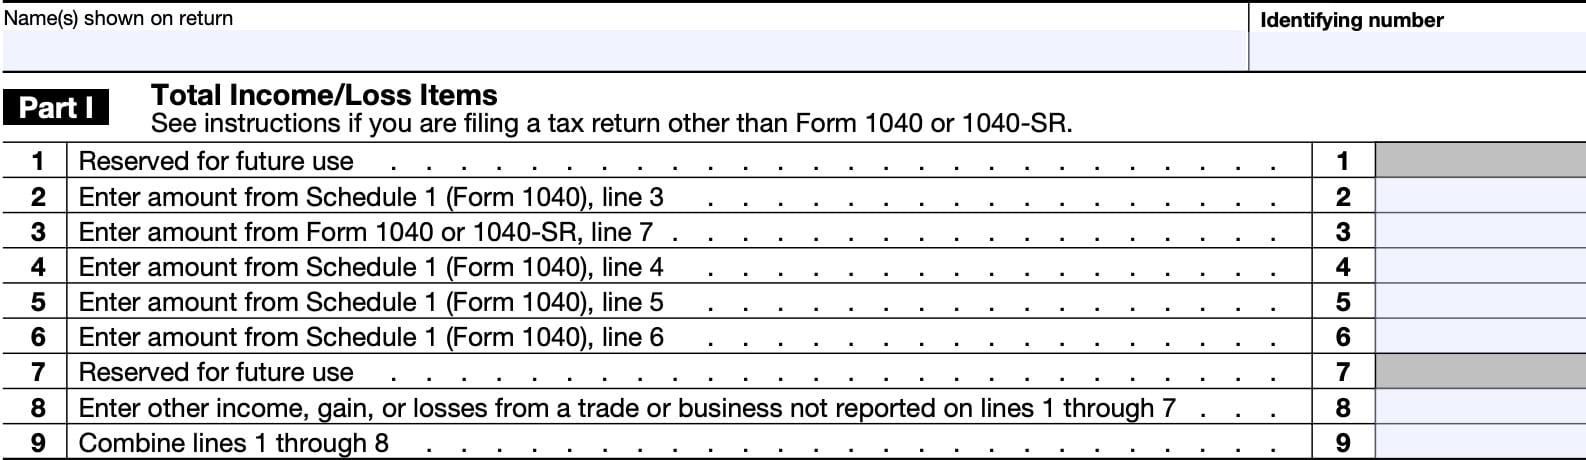 part i: total income/loss items